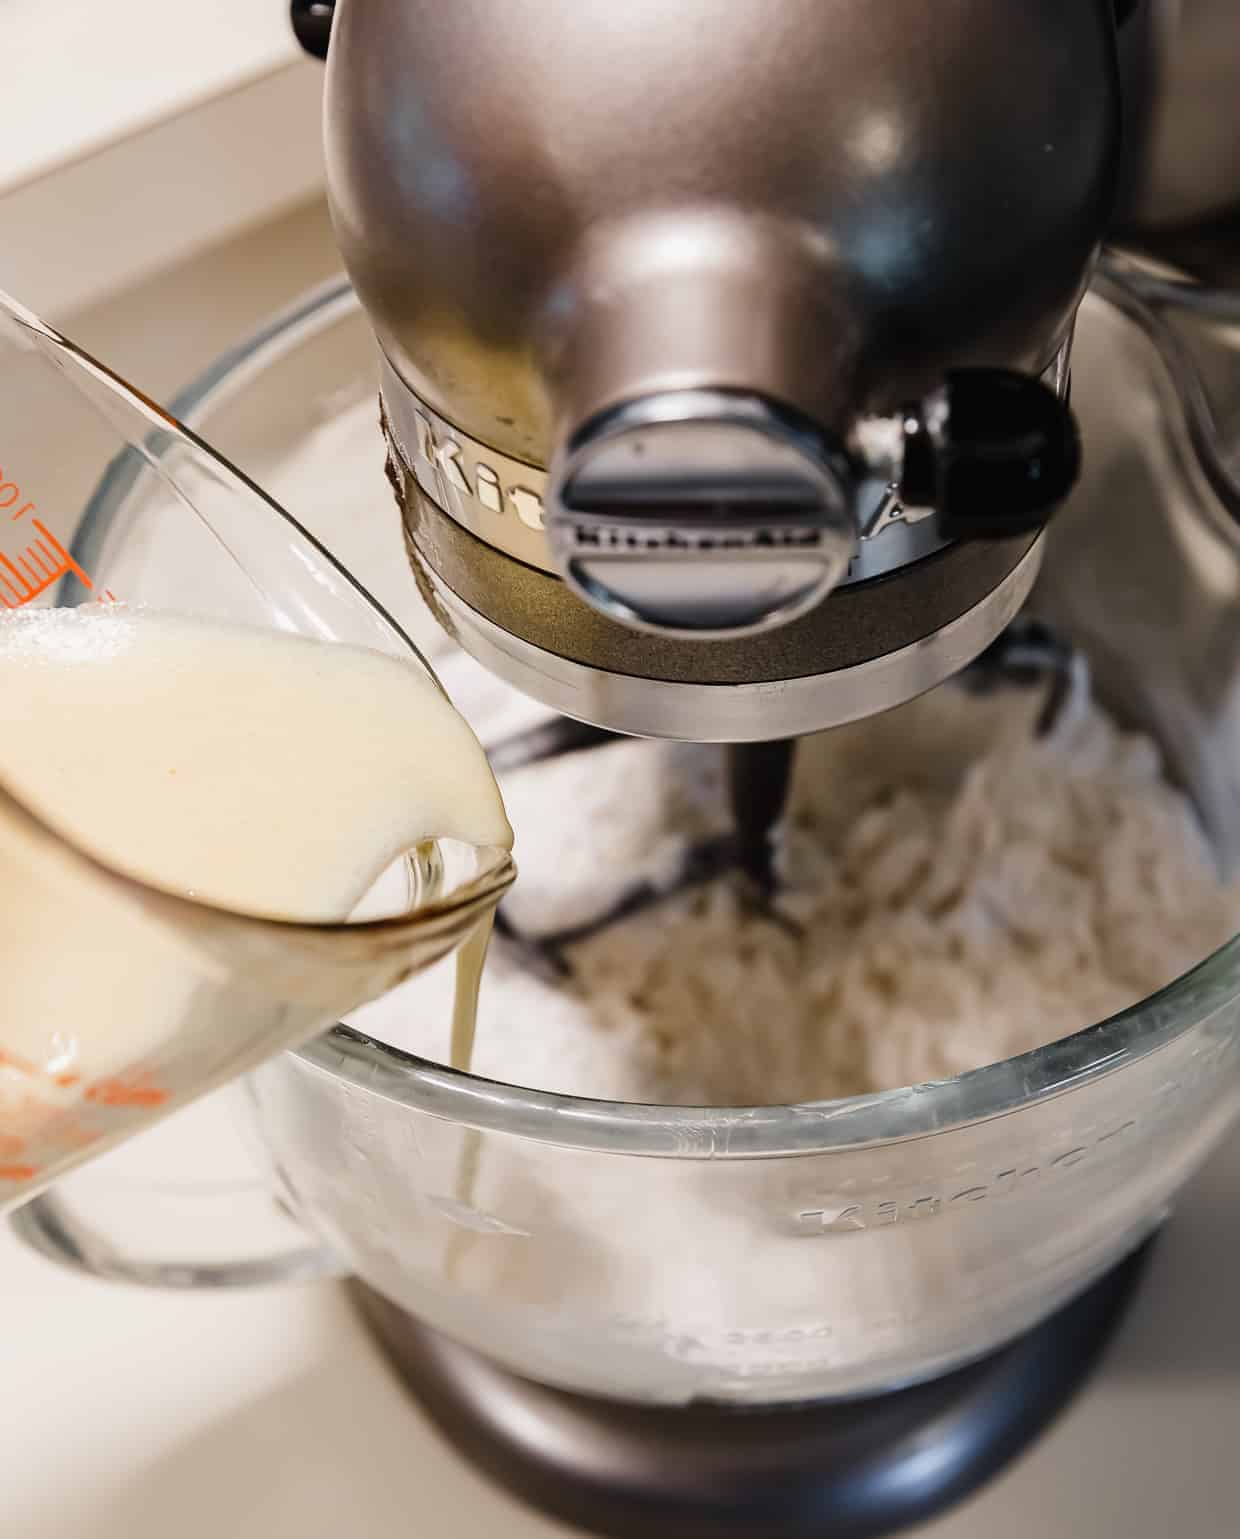 Liquid ingredients being poured into a stand mixer bowl.